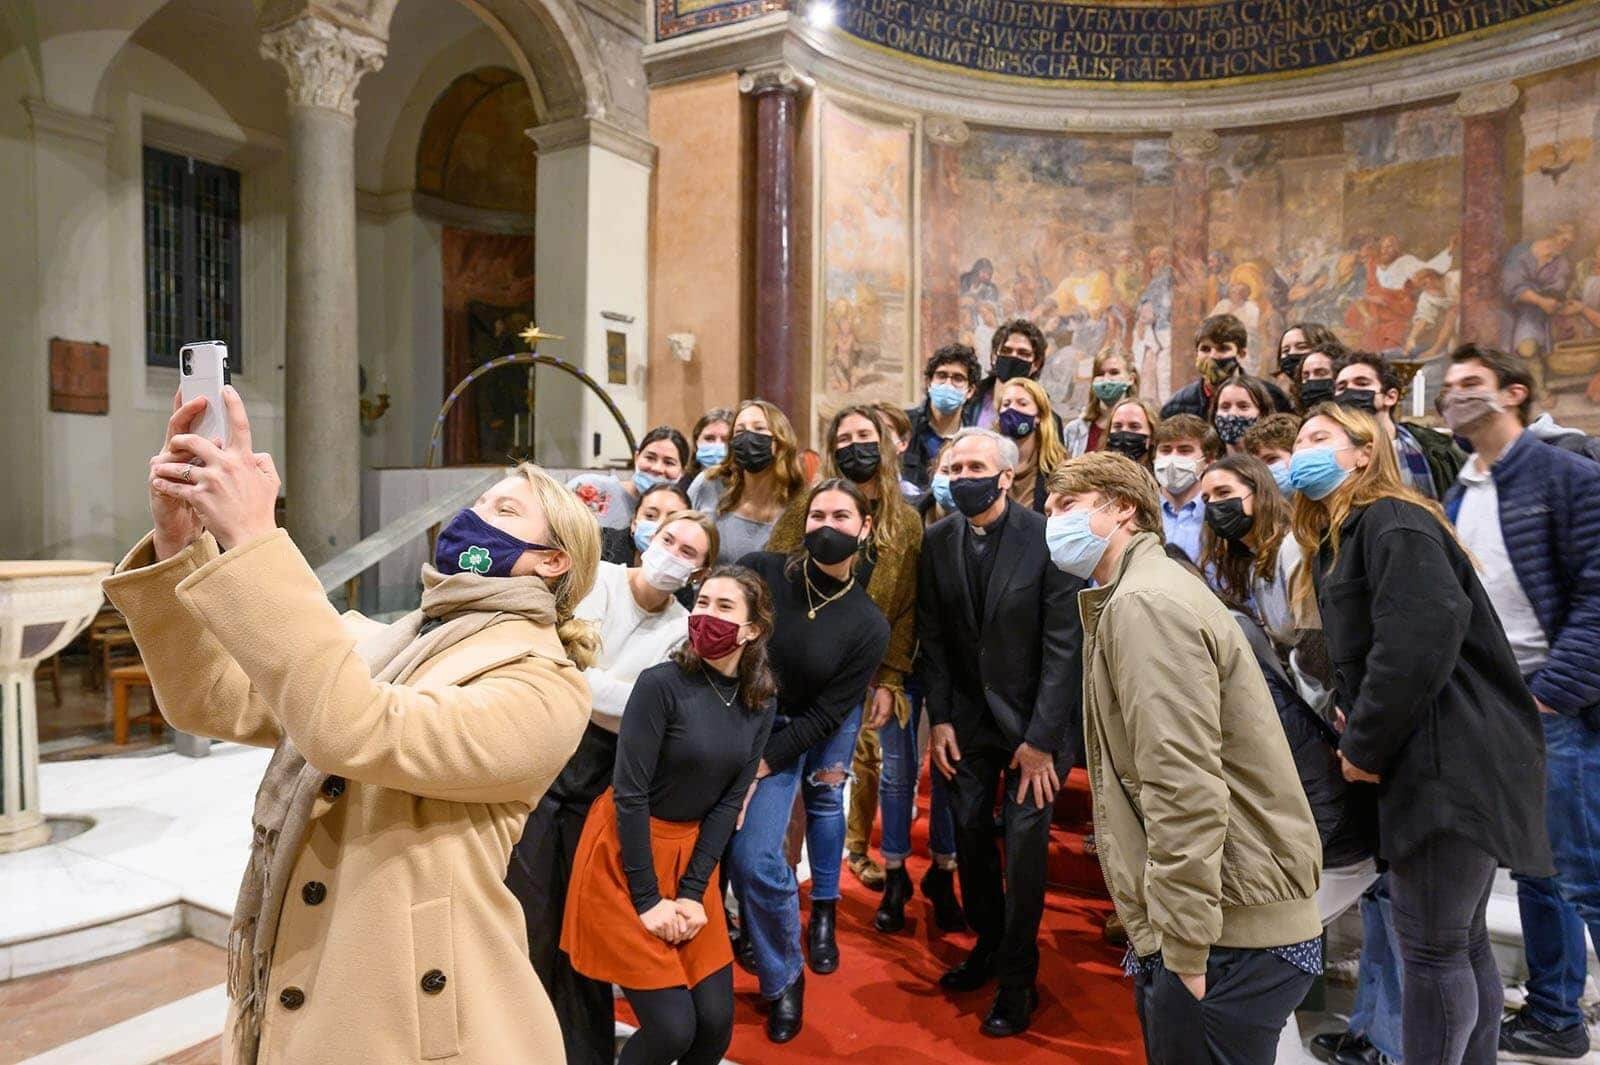 One masked student with a camera takes a group selfie with Fr. Jenkins and several other Notre Dame students.